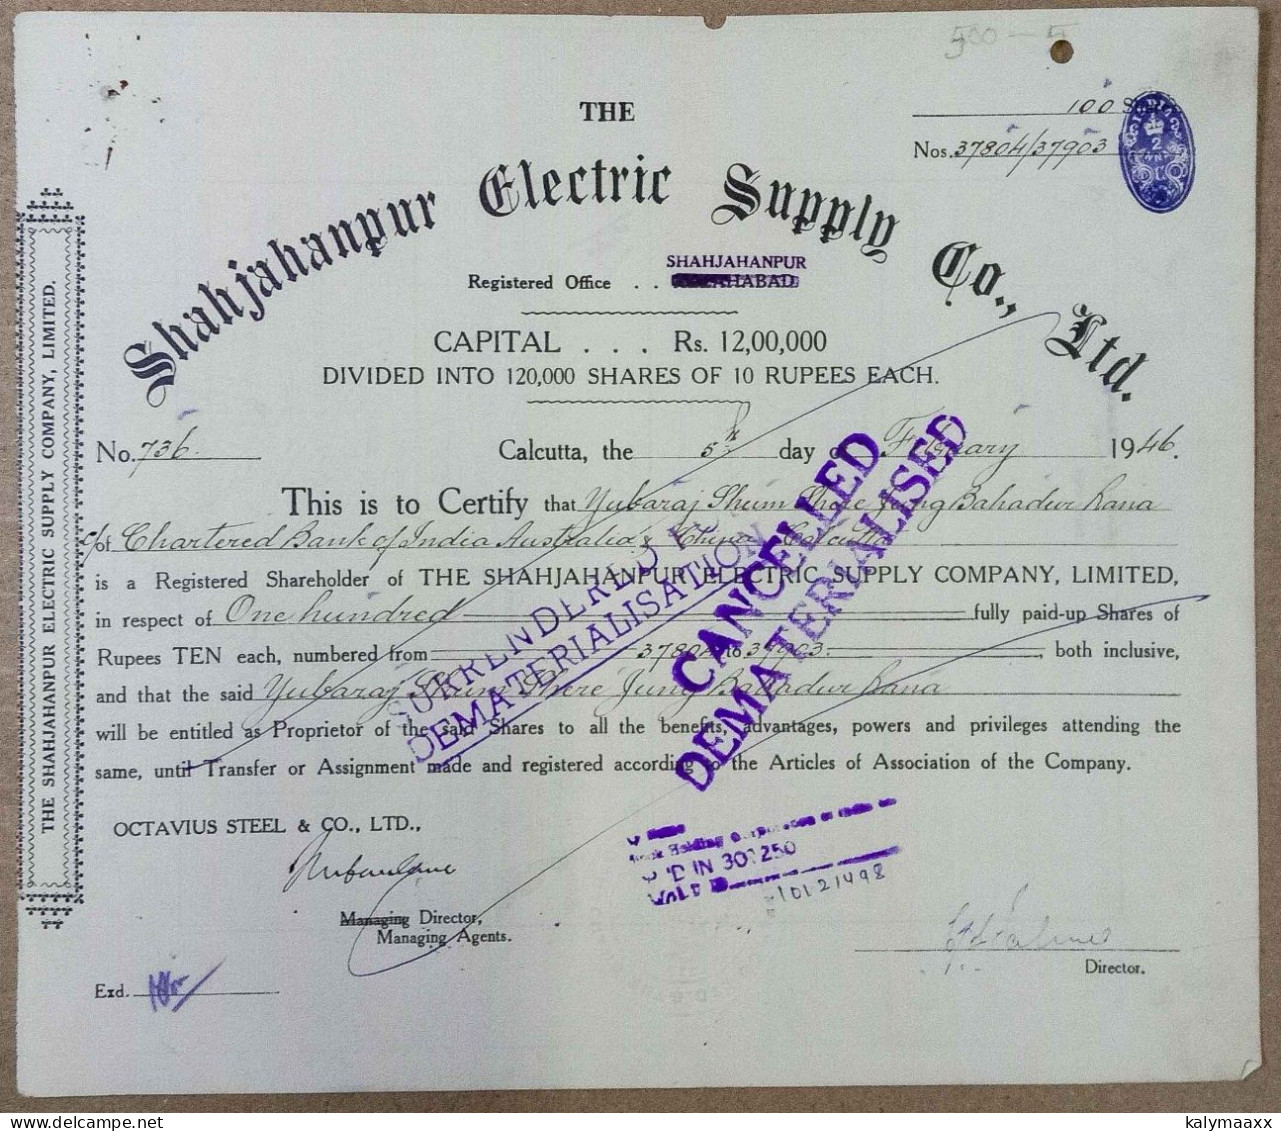 BRITISH INDIA 1946 THE SHAHJAHANPUR ELECTRIC SUPPLY COMPANY LIMITED, ELECTRICITY....SHARE CERTIFICATE - Elektrizität & Gas